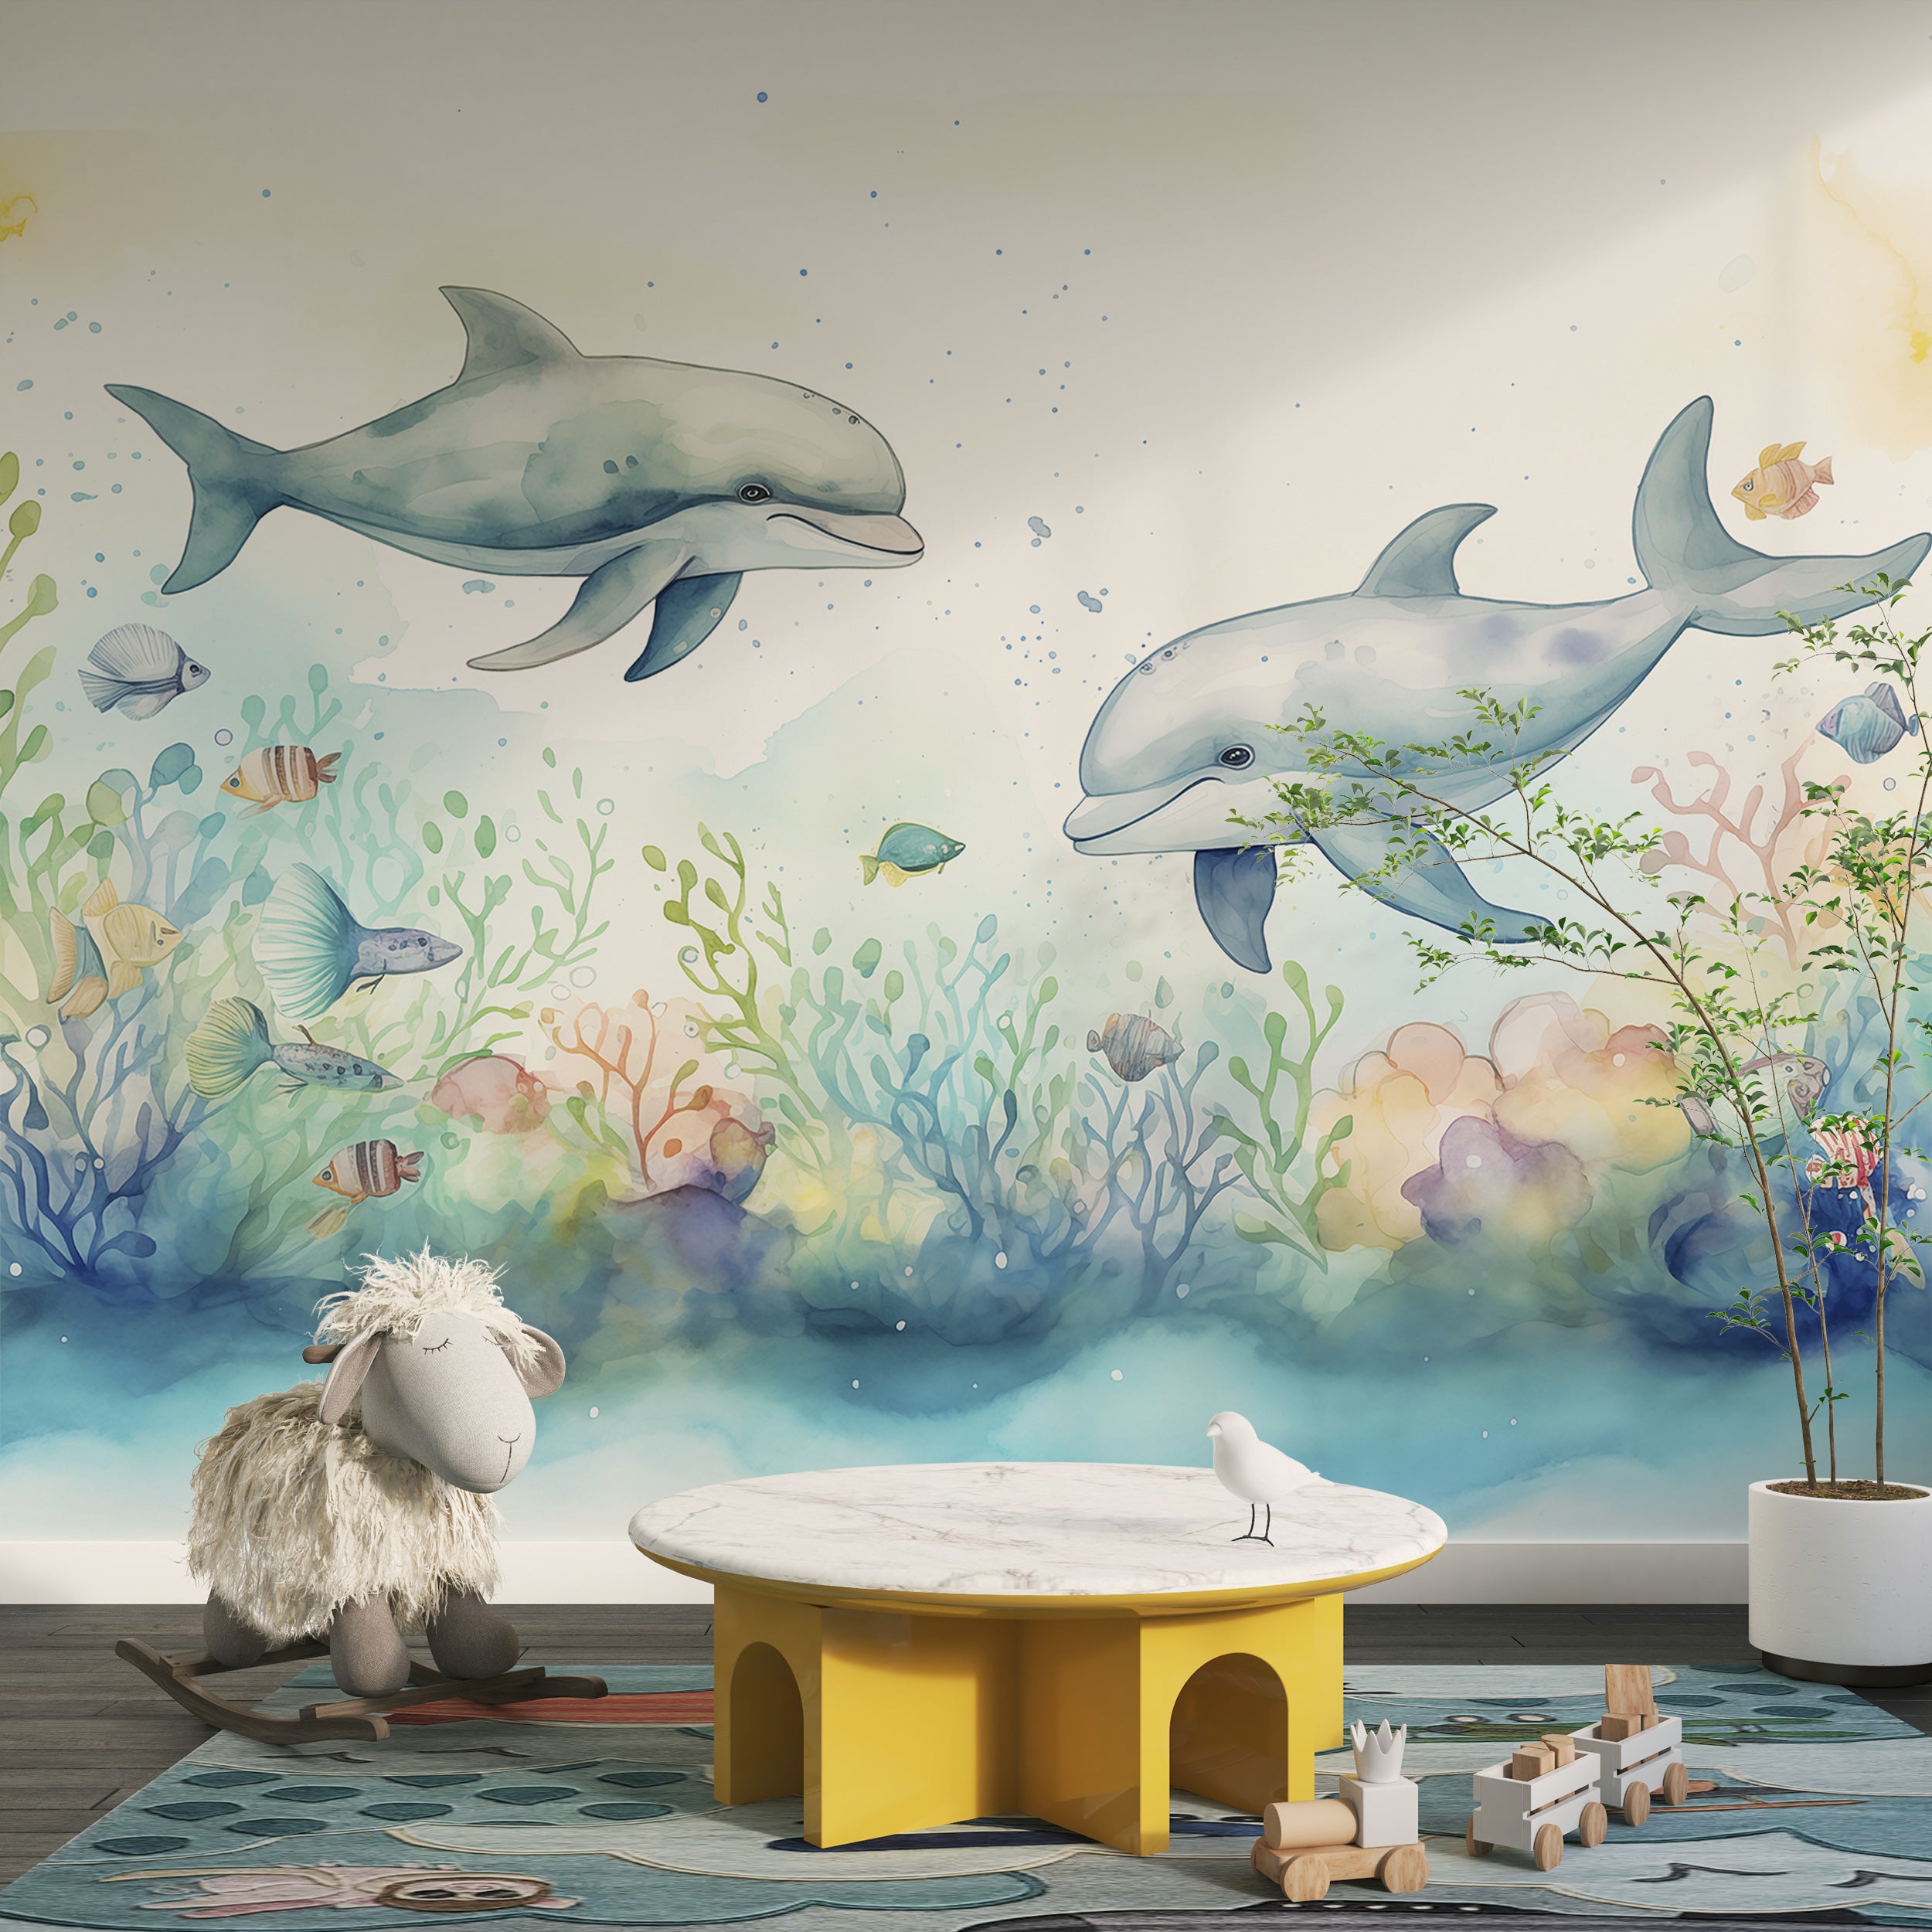 Colorful Ocean Theme Wall Decal